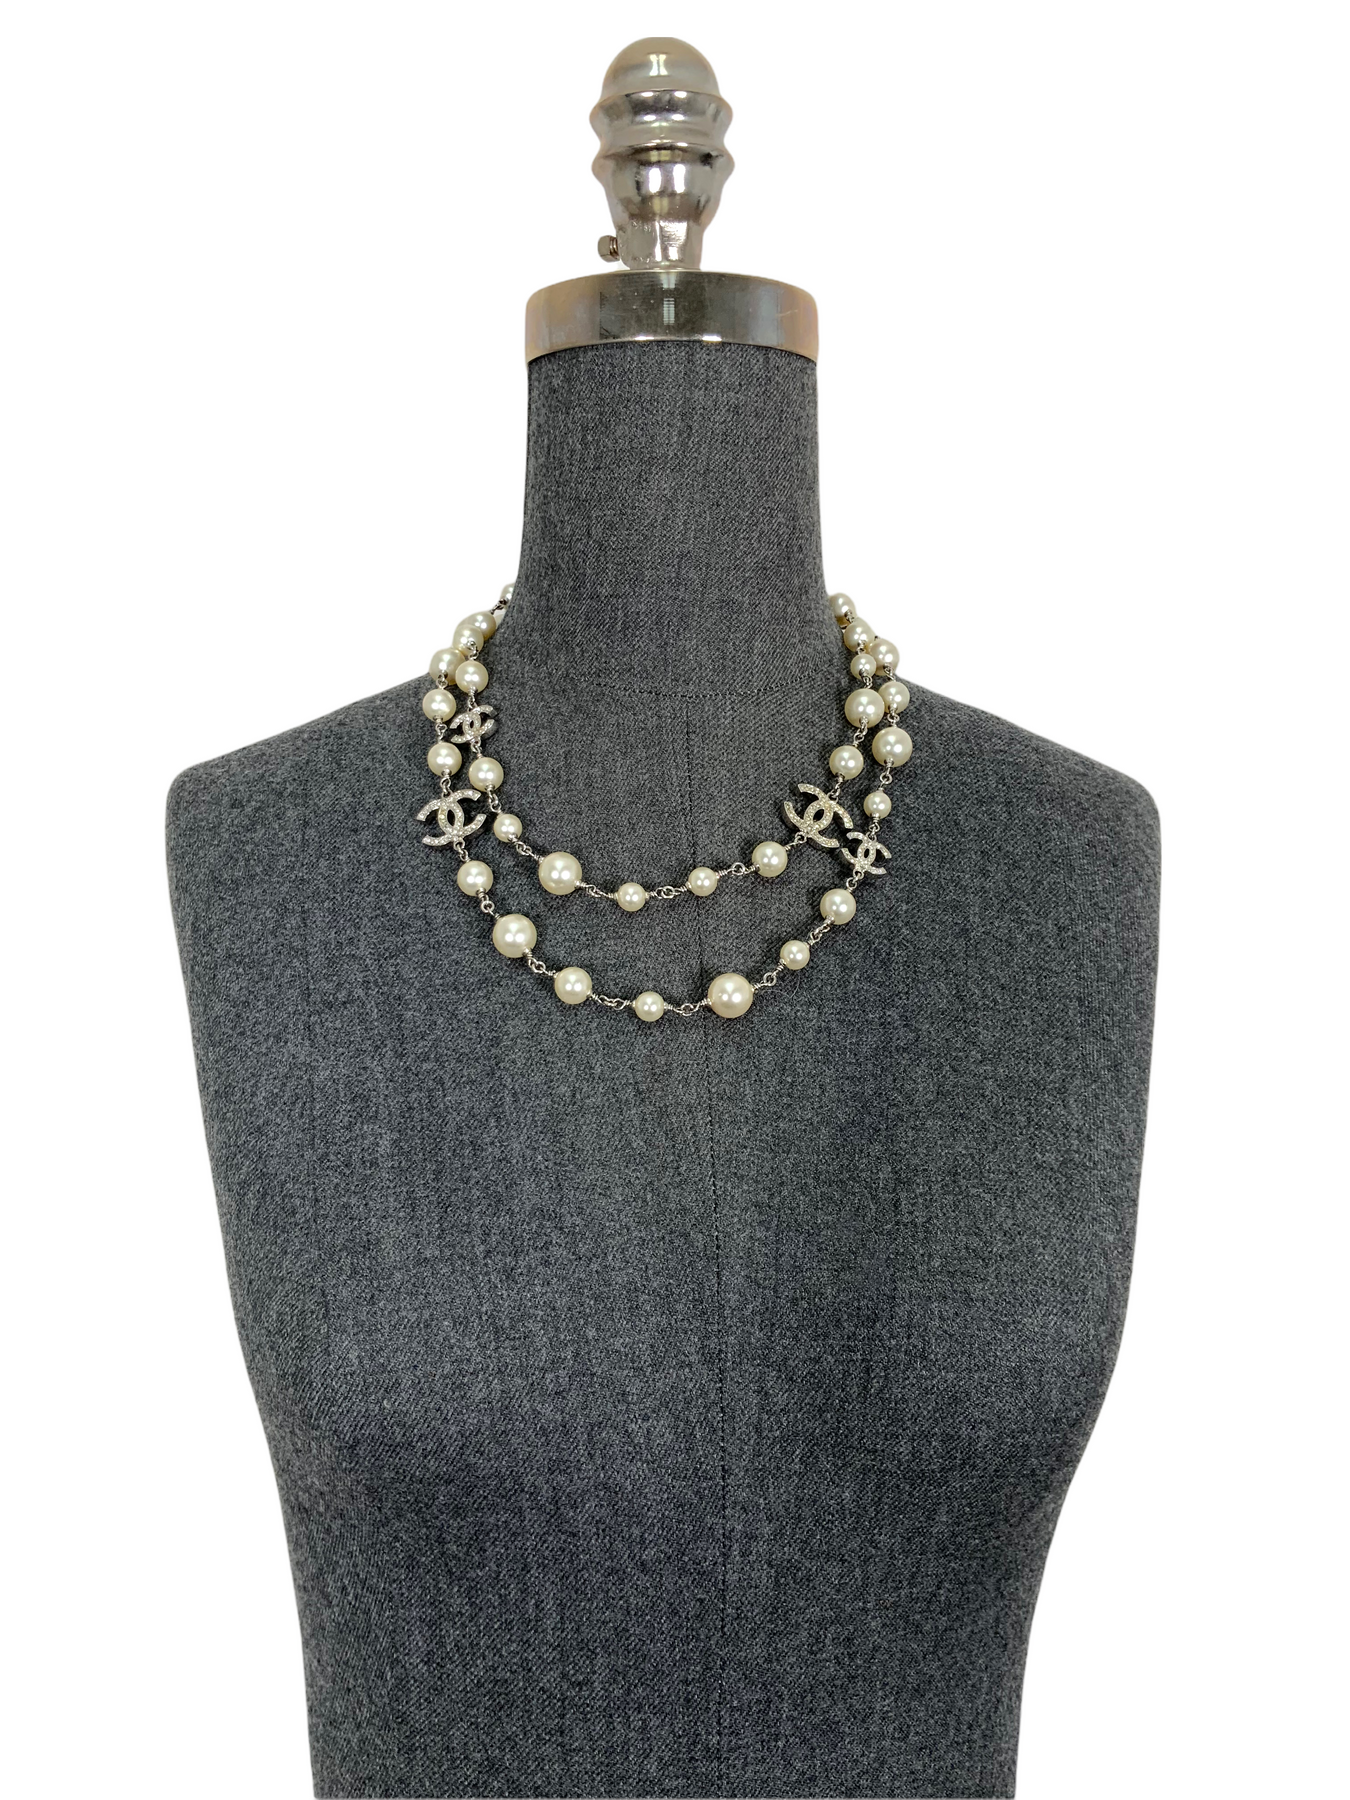 Chanel Pearl and Crystal Necklace-VeryVintage – Very Vintage